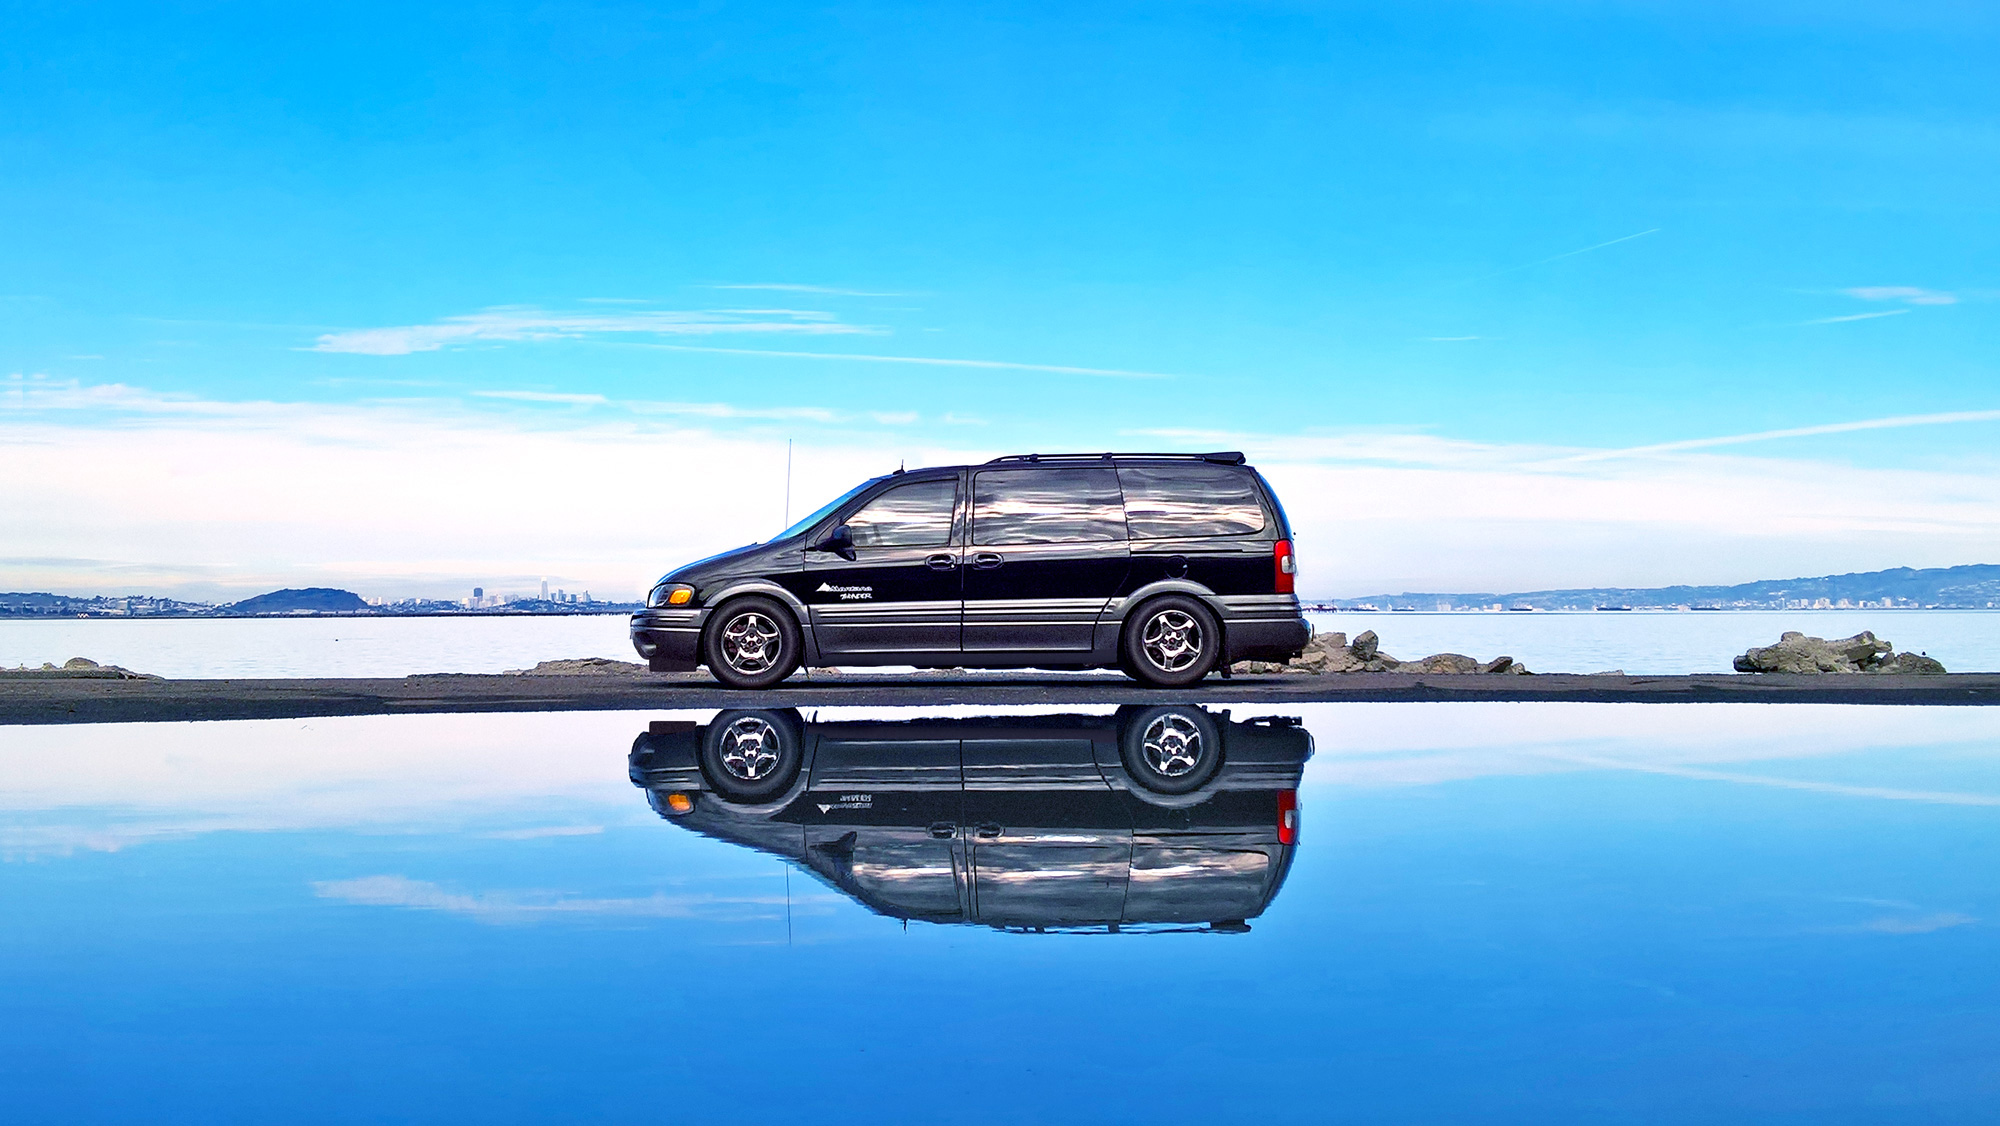 Reflection in water of a profile/side view of a 2003 AWD Pontiac Montana Thunder in black overlooking SFO and San Francisco skyline